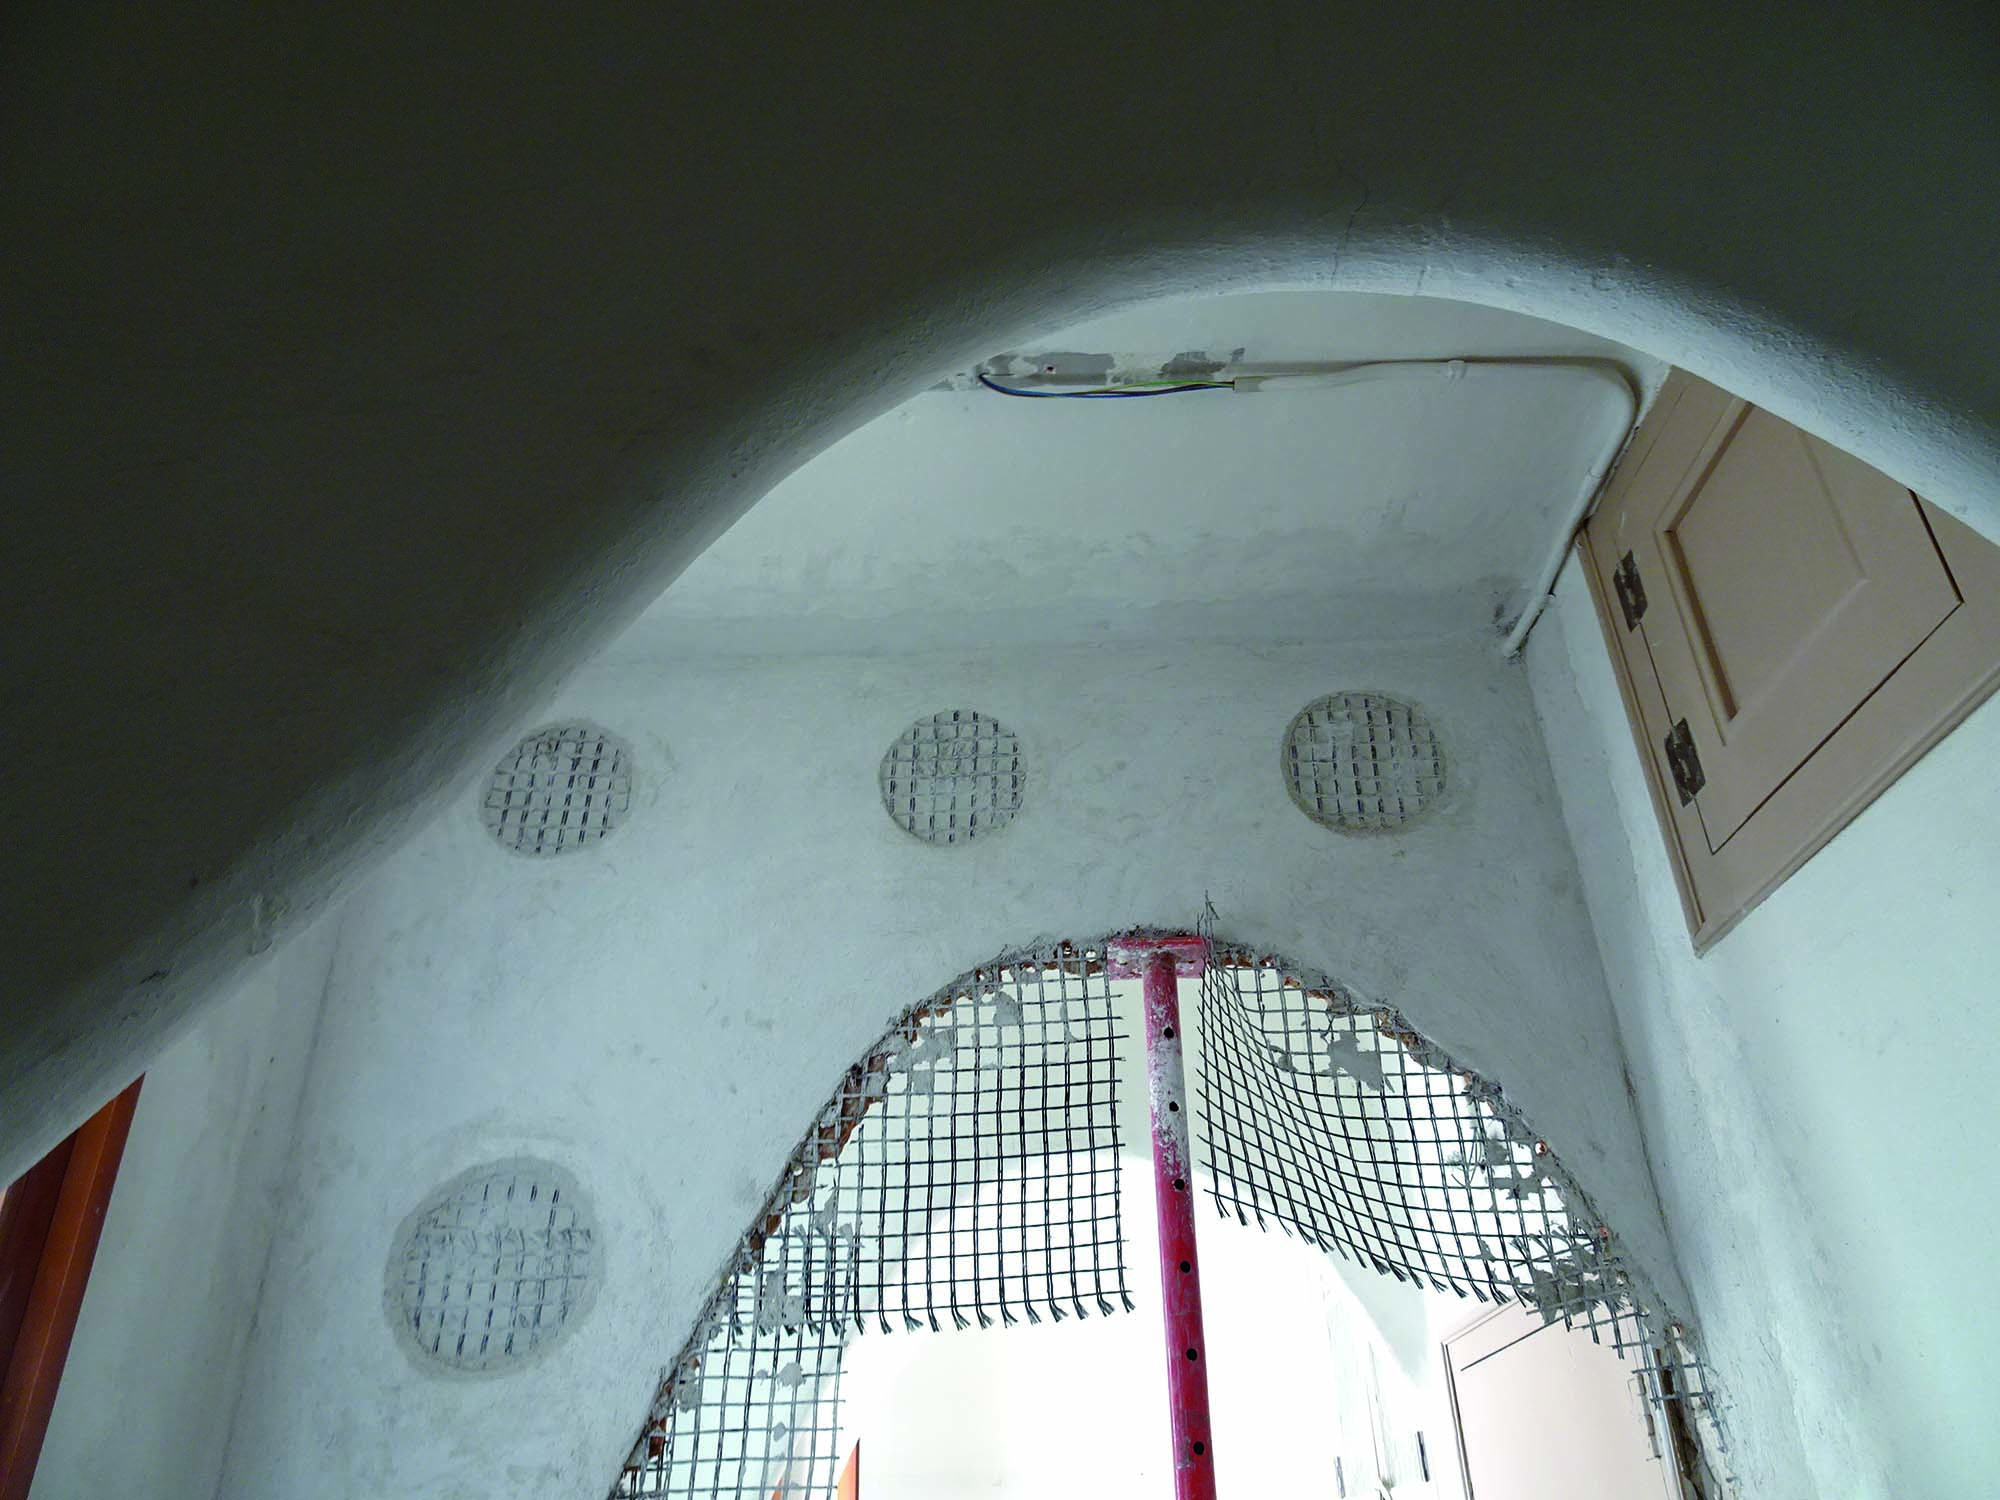 Casa Batlló - Gaudì-Structural strengthening work and restoration with Mapei systems (2)